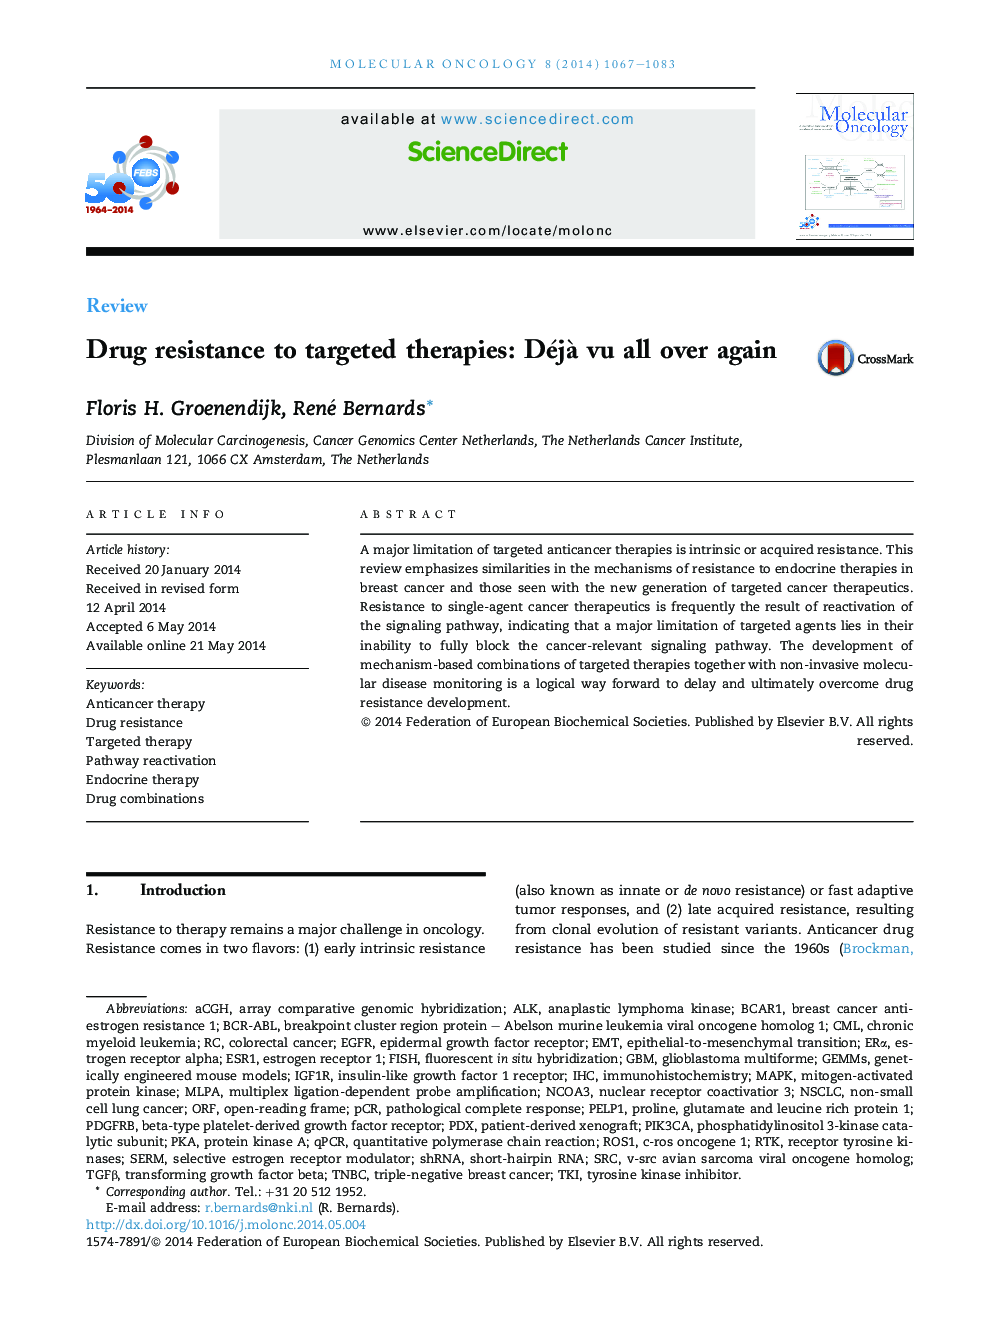 Drug resistance to targeted therapies: Déjà vu all over again